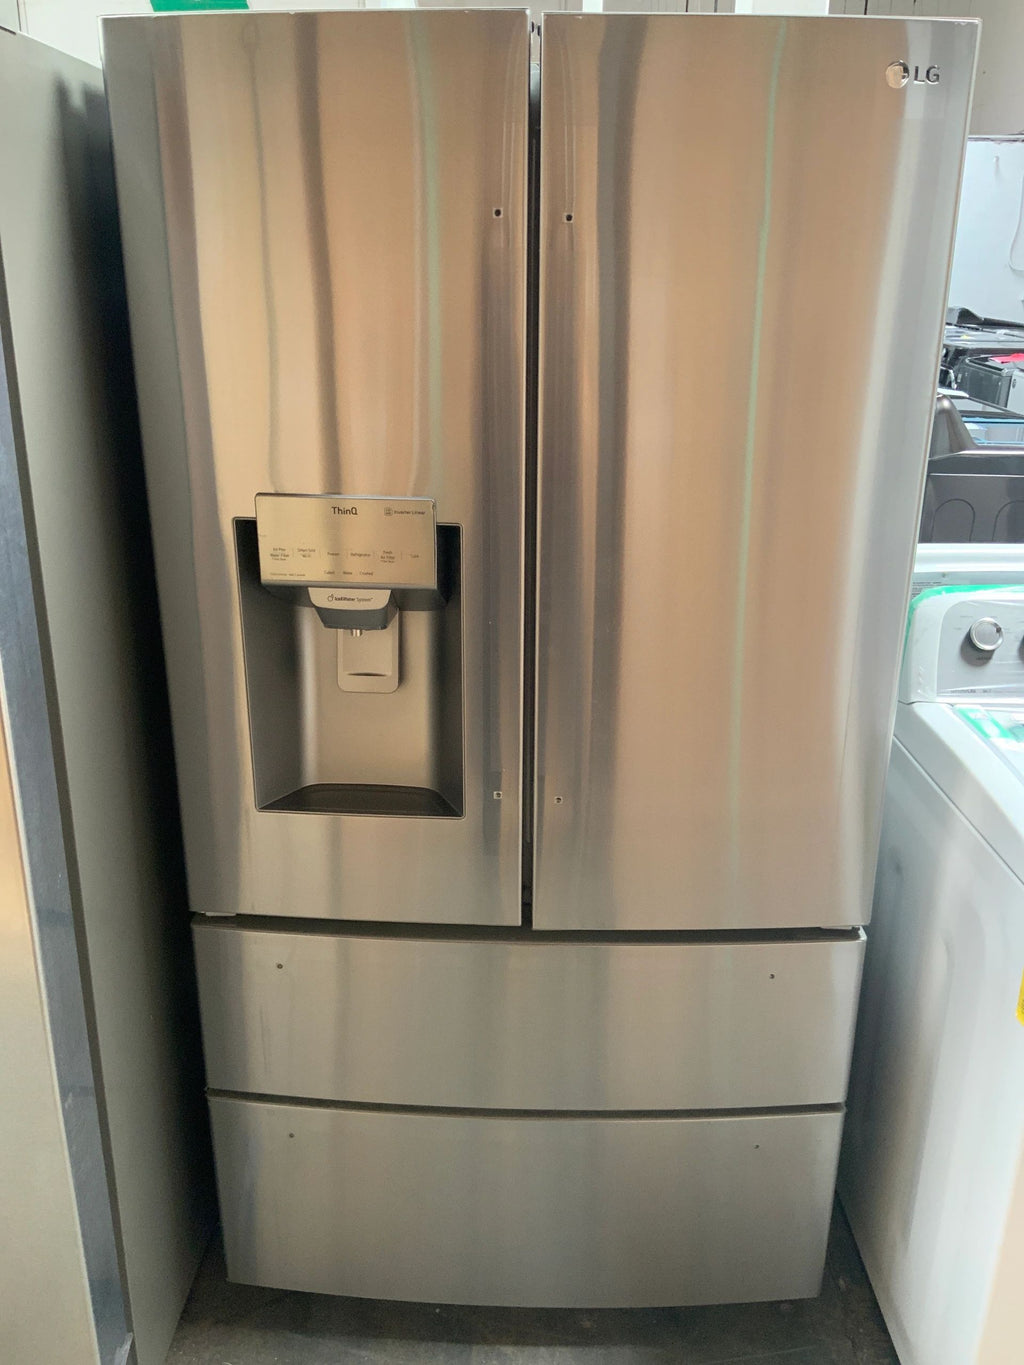 New Open Box. 27.8 cu. ft. 4 Door French Door Smart Refrigerator with 2 Freezer Drawers and Wi-Fi Enabled in Stainless Steel Model: LMXS28626S